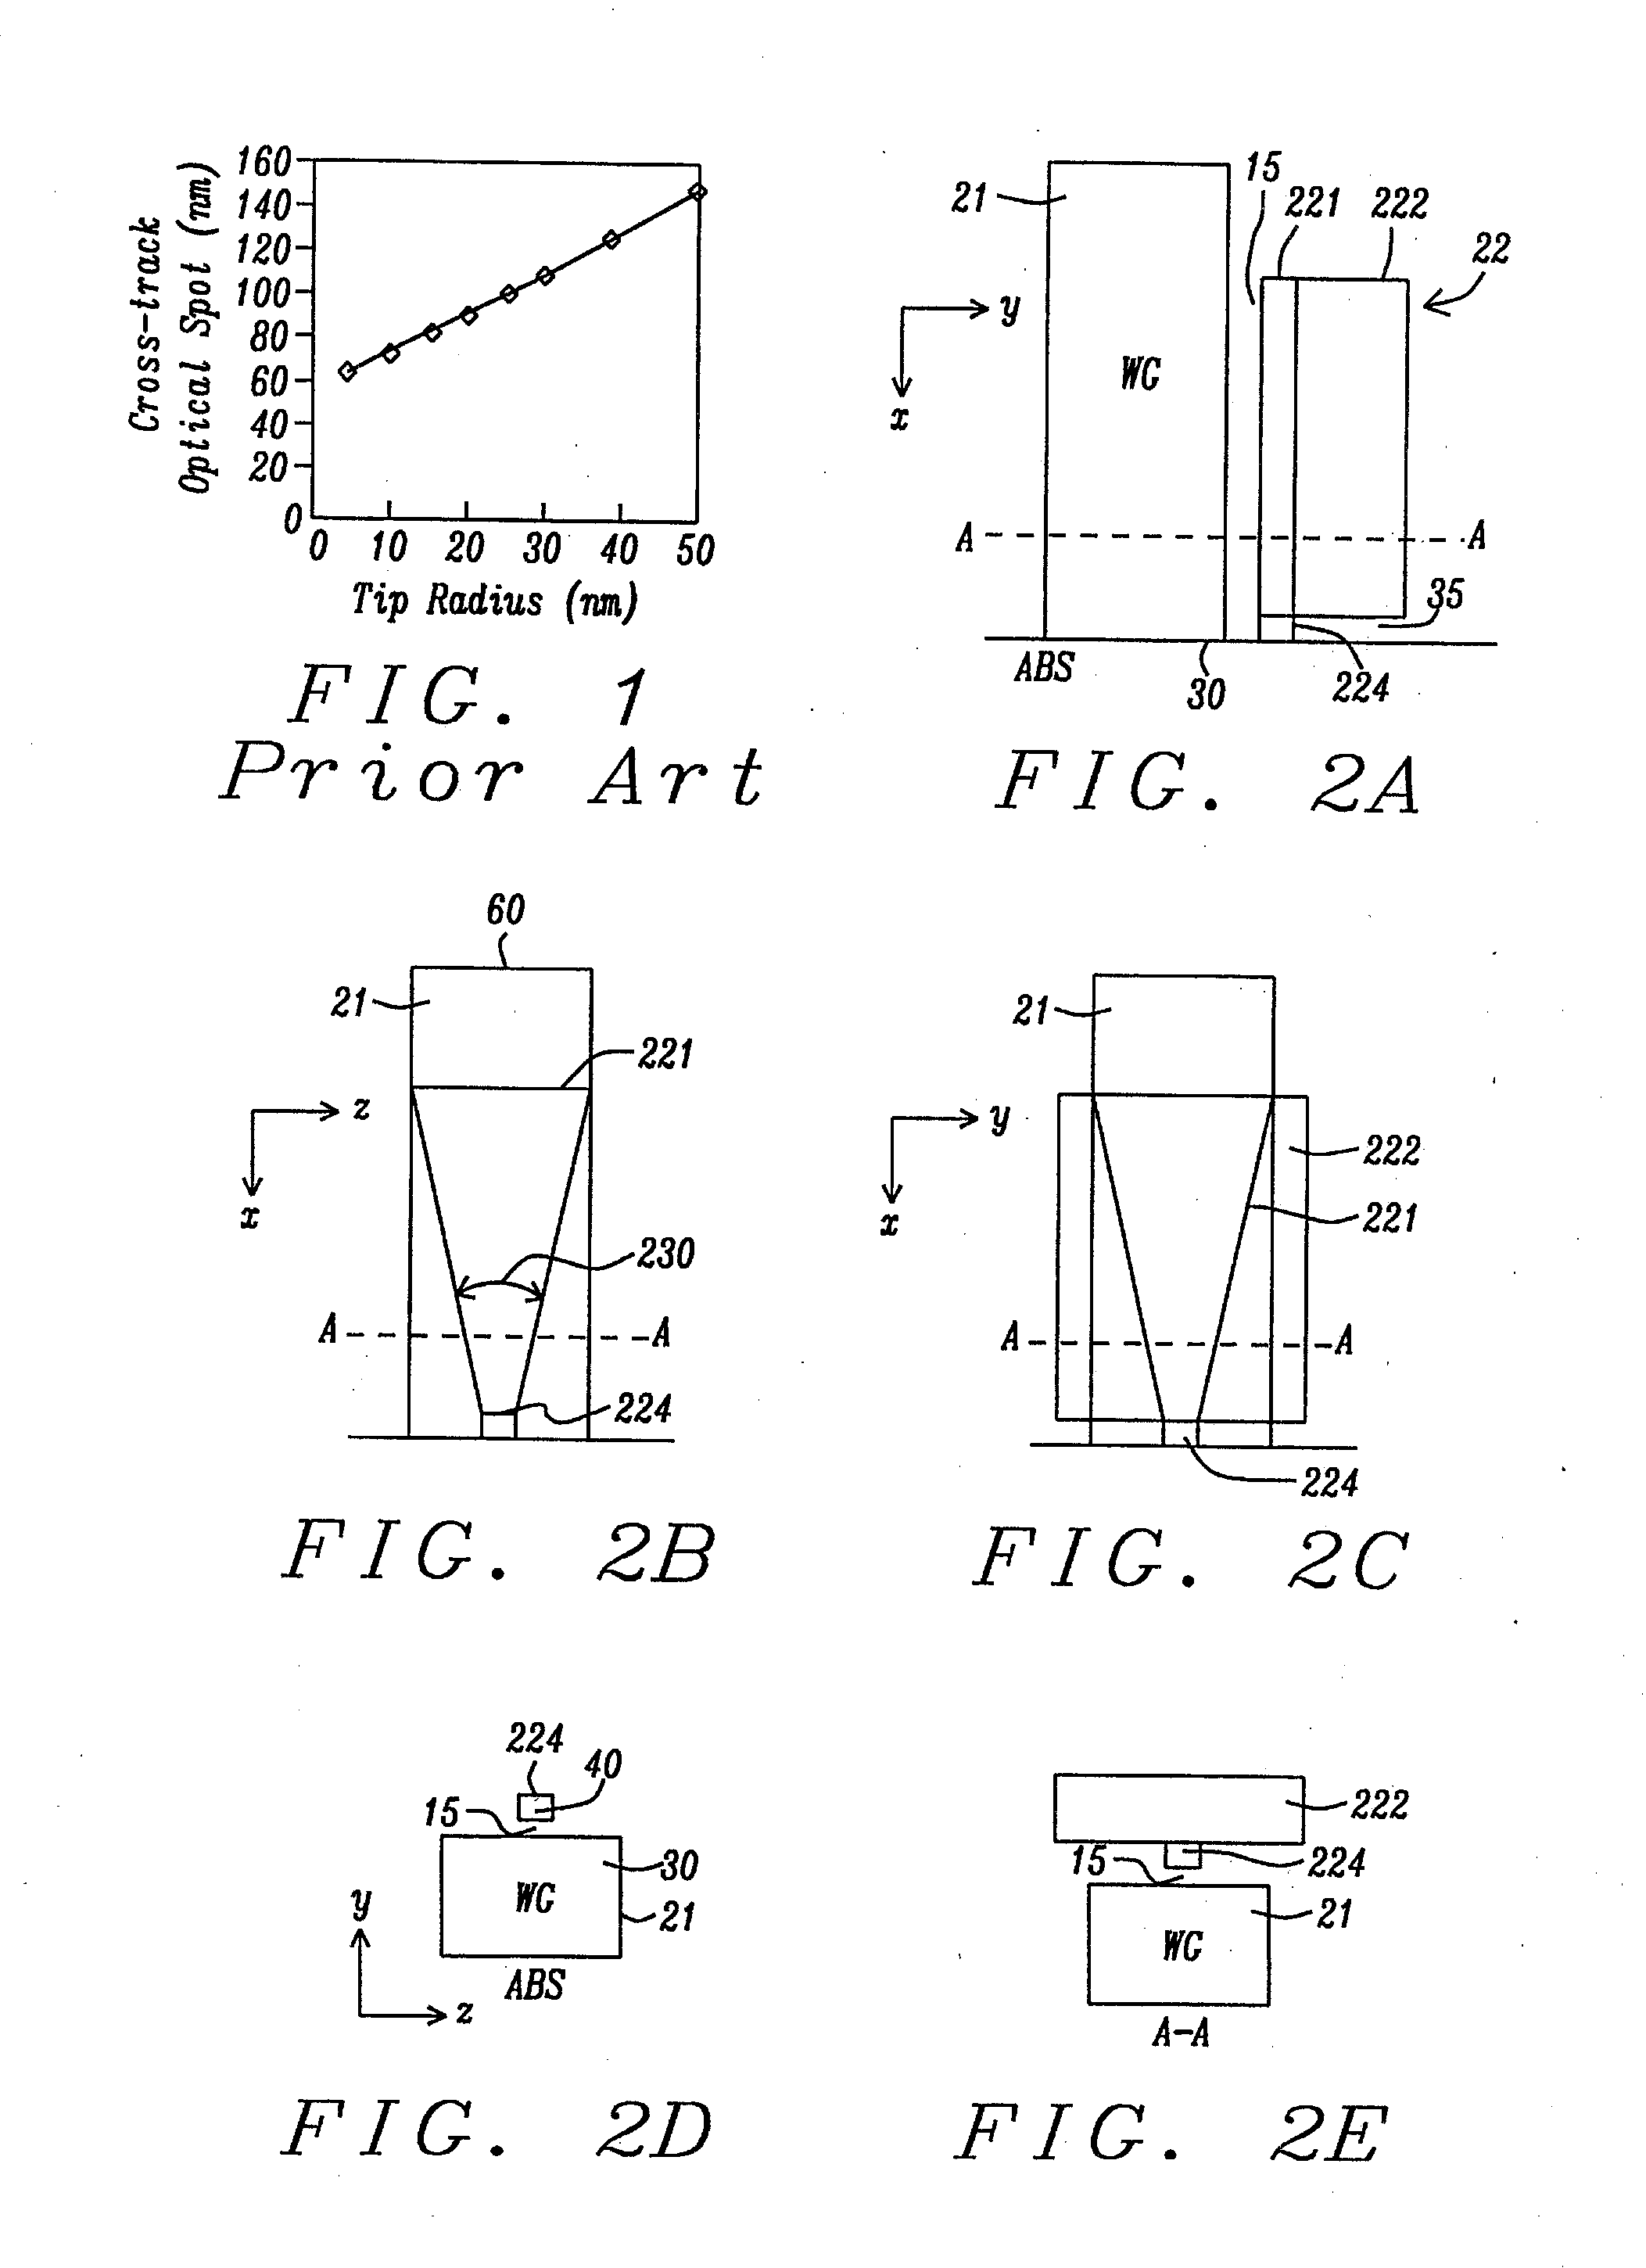 Planar Plasmon Generator with a Scalable Feature for TAMR